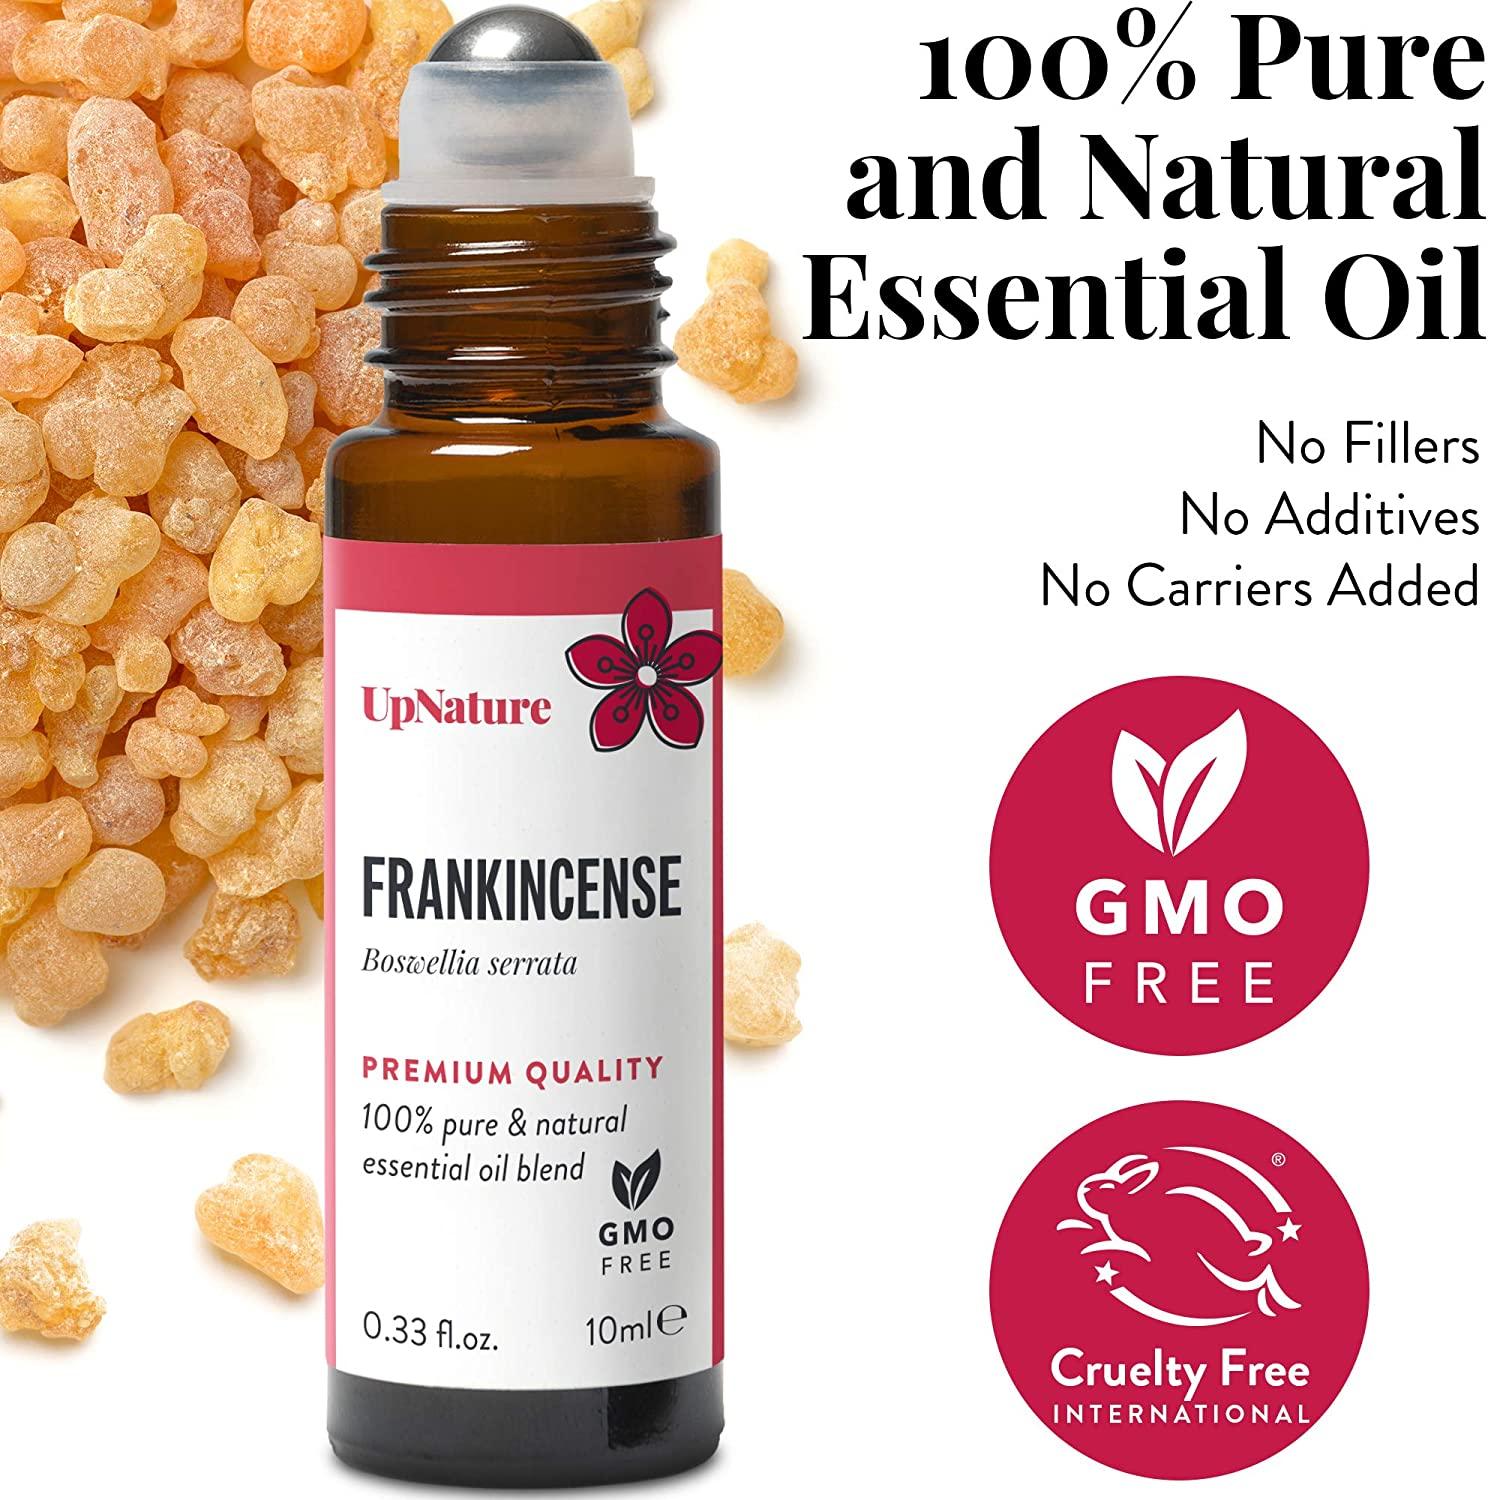 Frankincense Essential Oil Roll On – Topical Frankincense